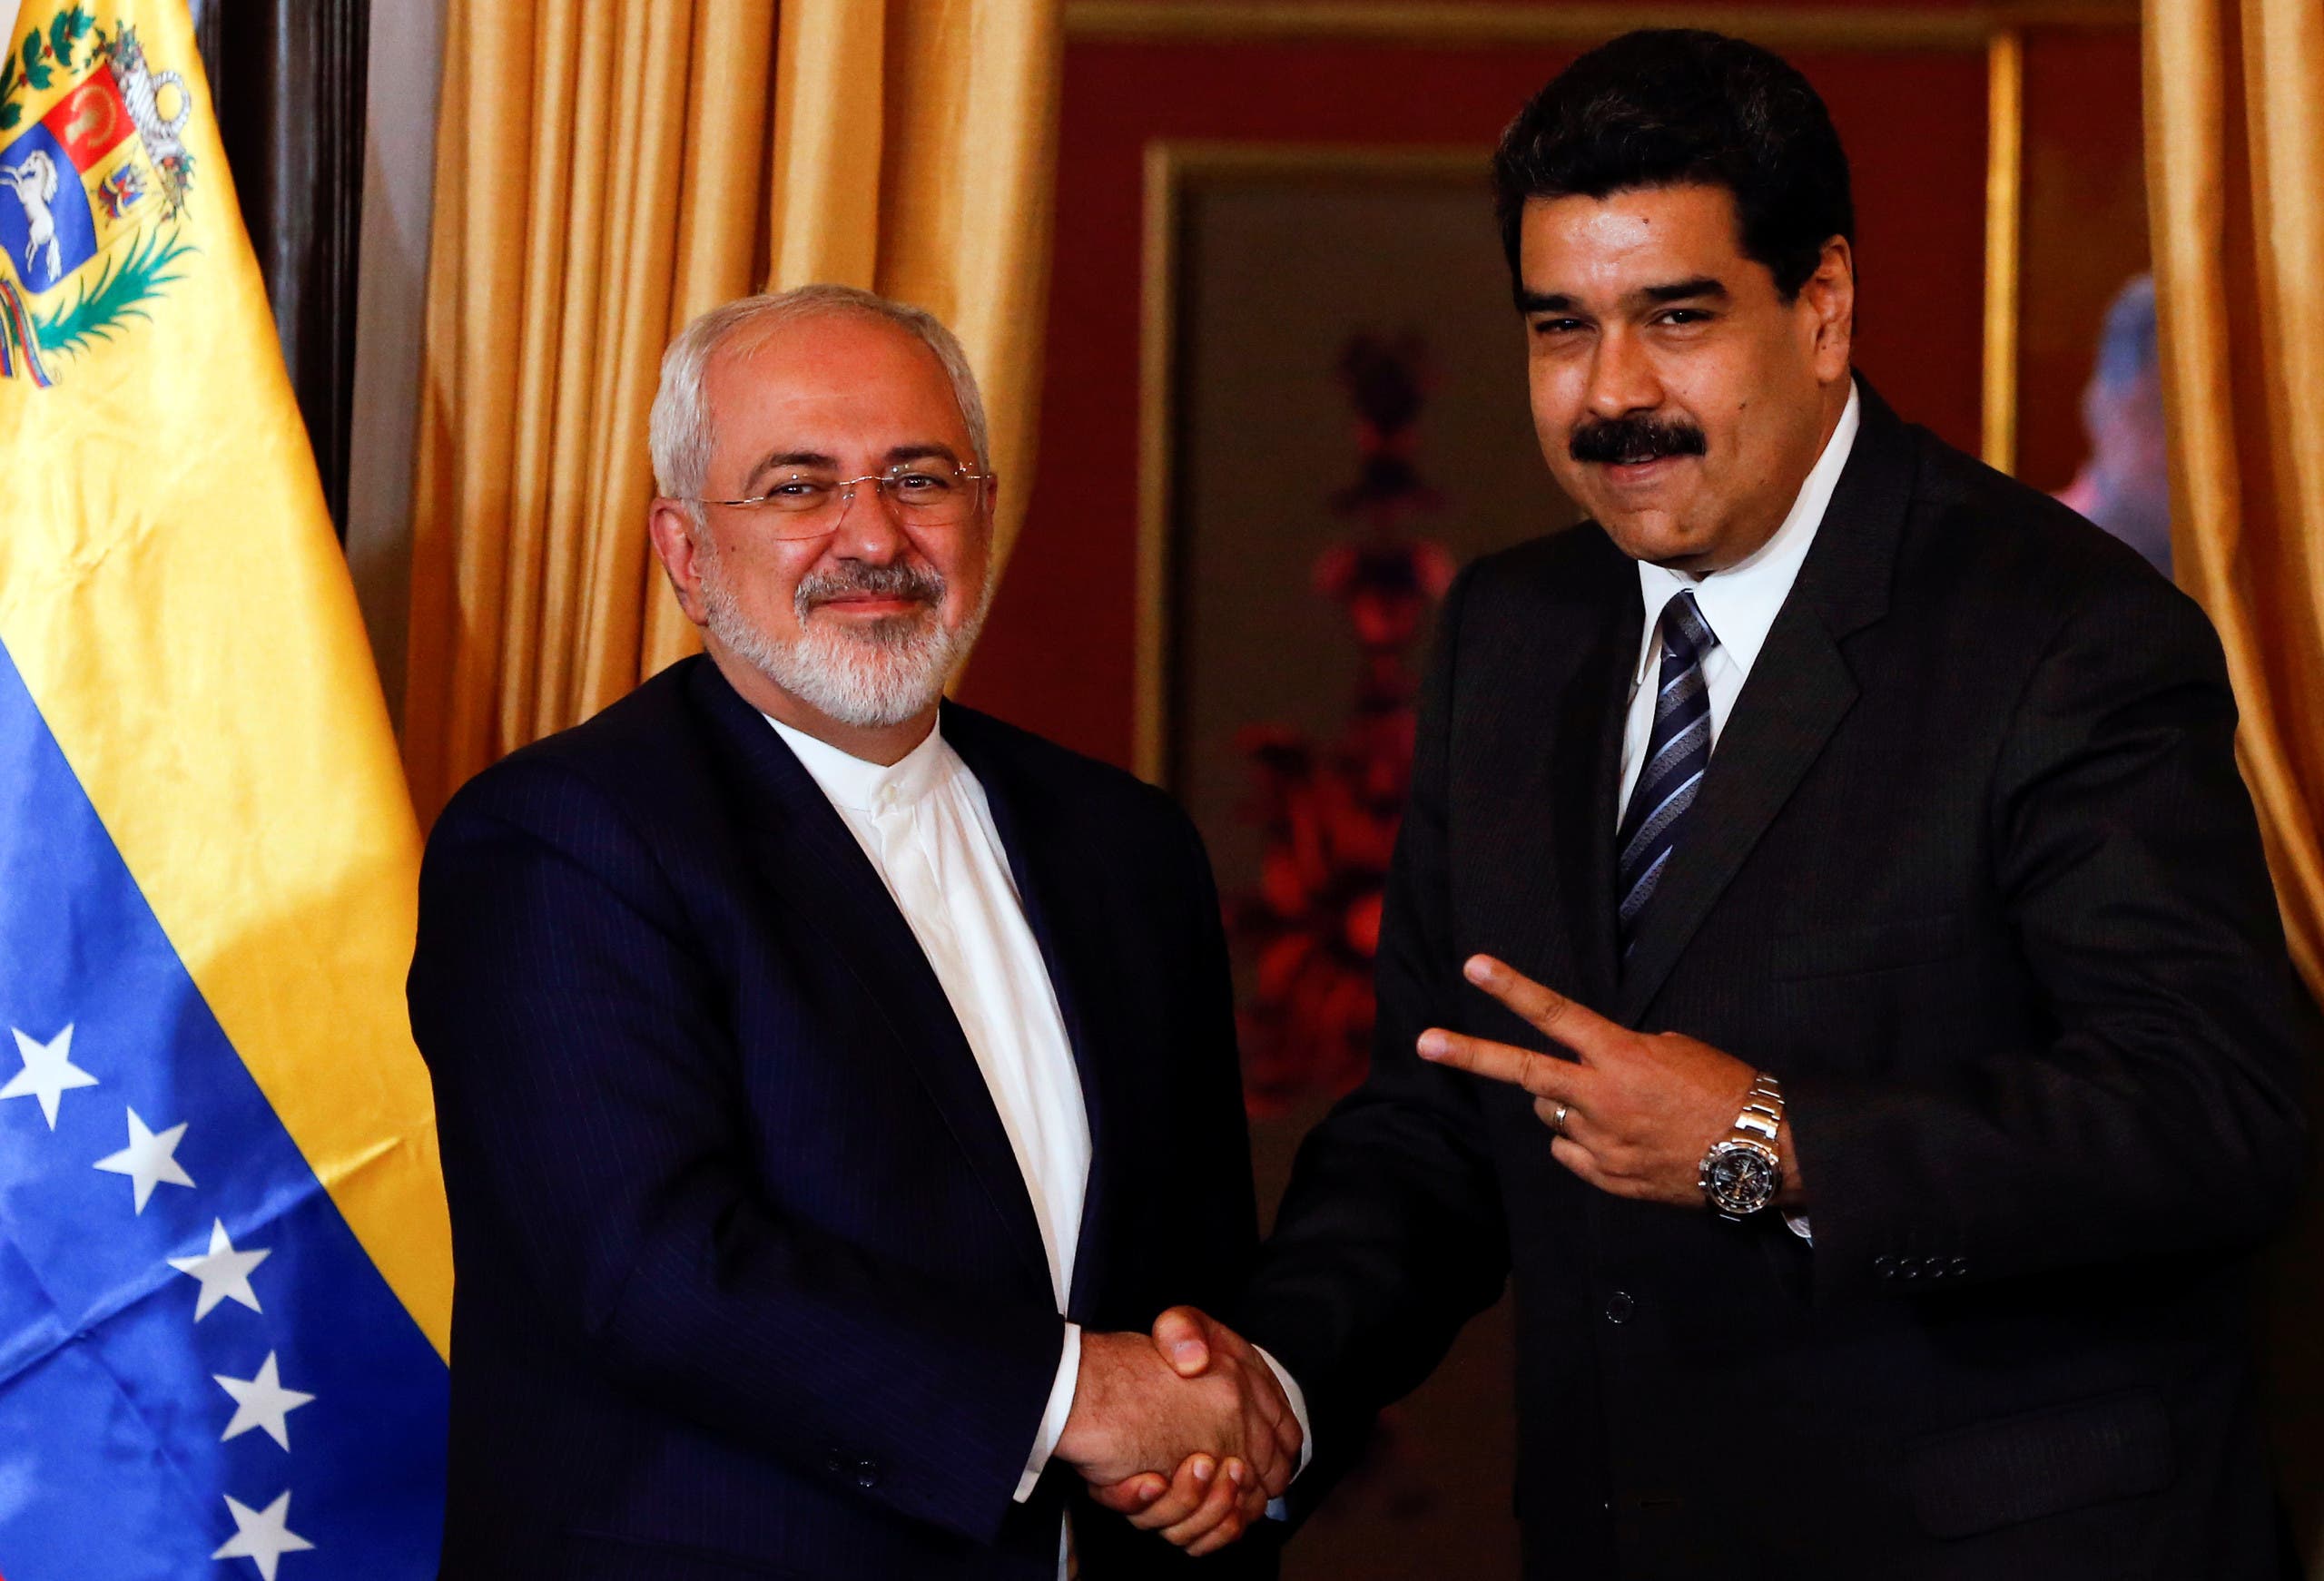 Venezuela's President Nicolas Maduro (R) and Iranian Foreign Minister Mohammad Javad Zarif shake hands in Caracas, Venezuela on August 27, 2016. (File photo: Reuters)